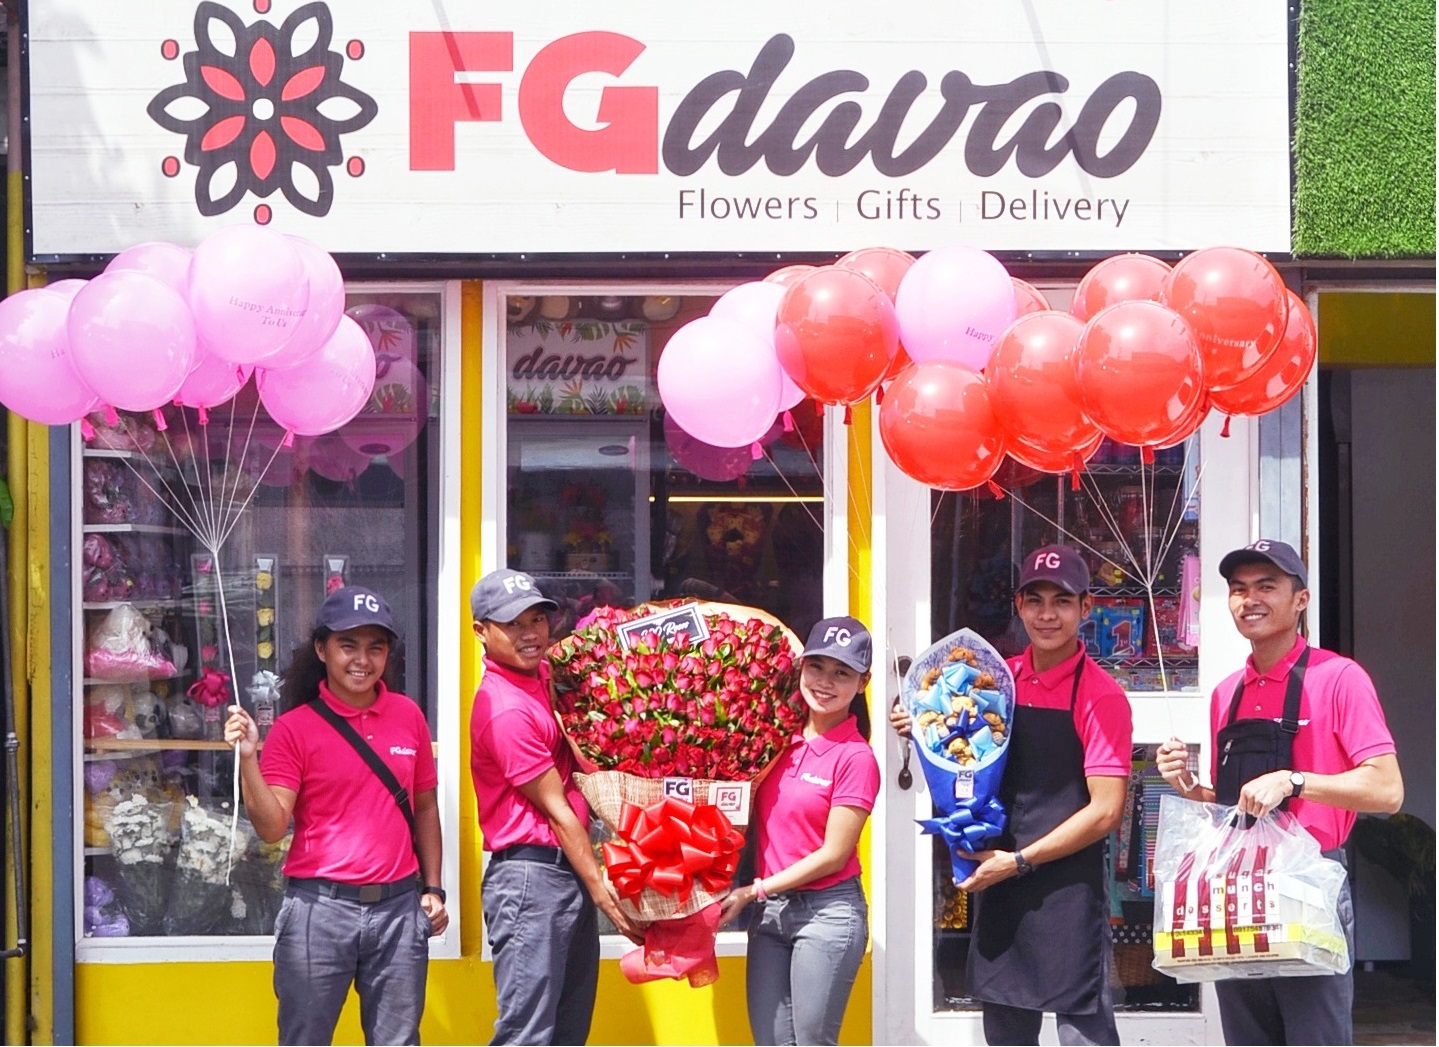 Chocolate Bouquet 36 – FG Davao – Flowers Gifts Delivery